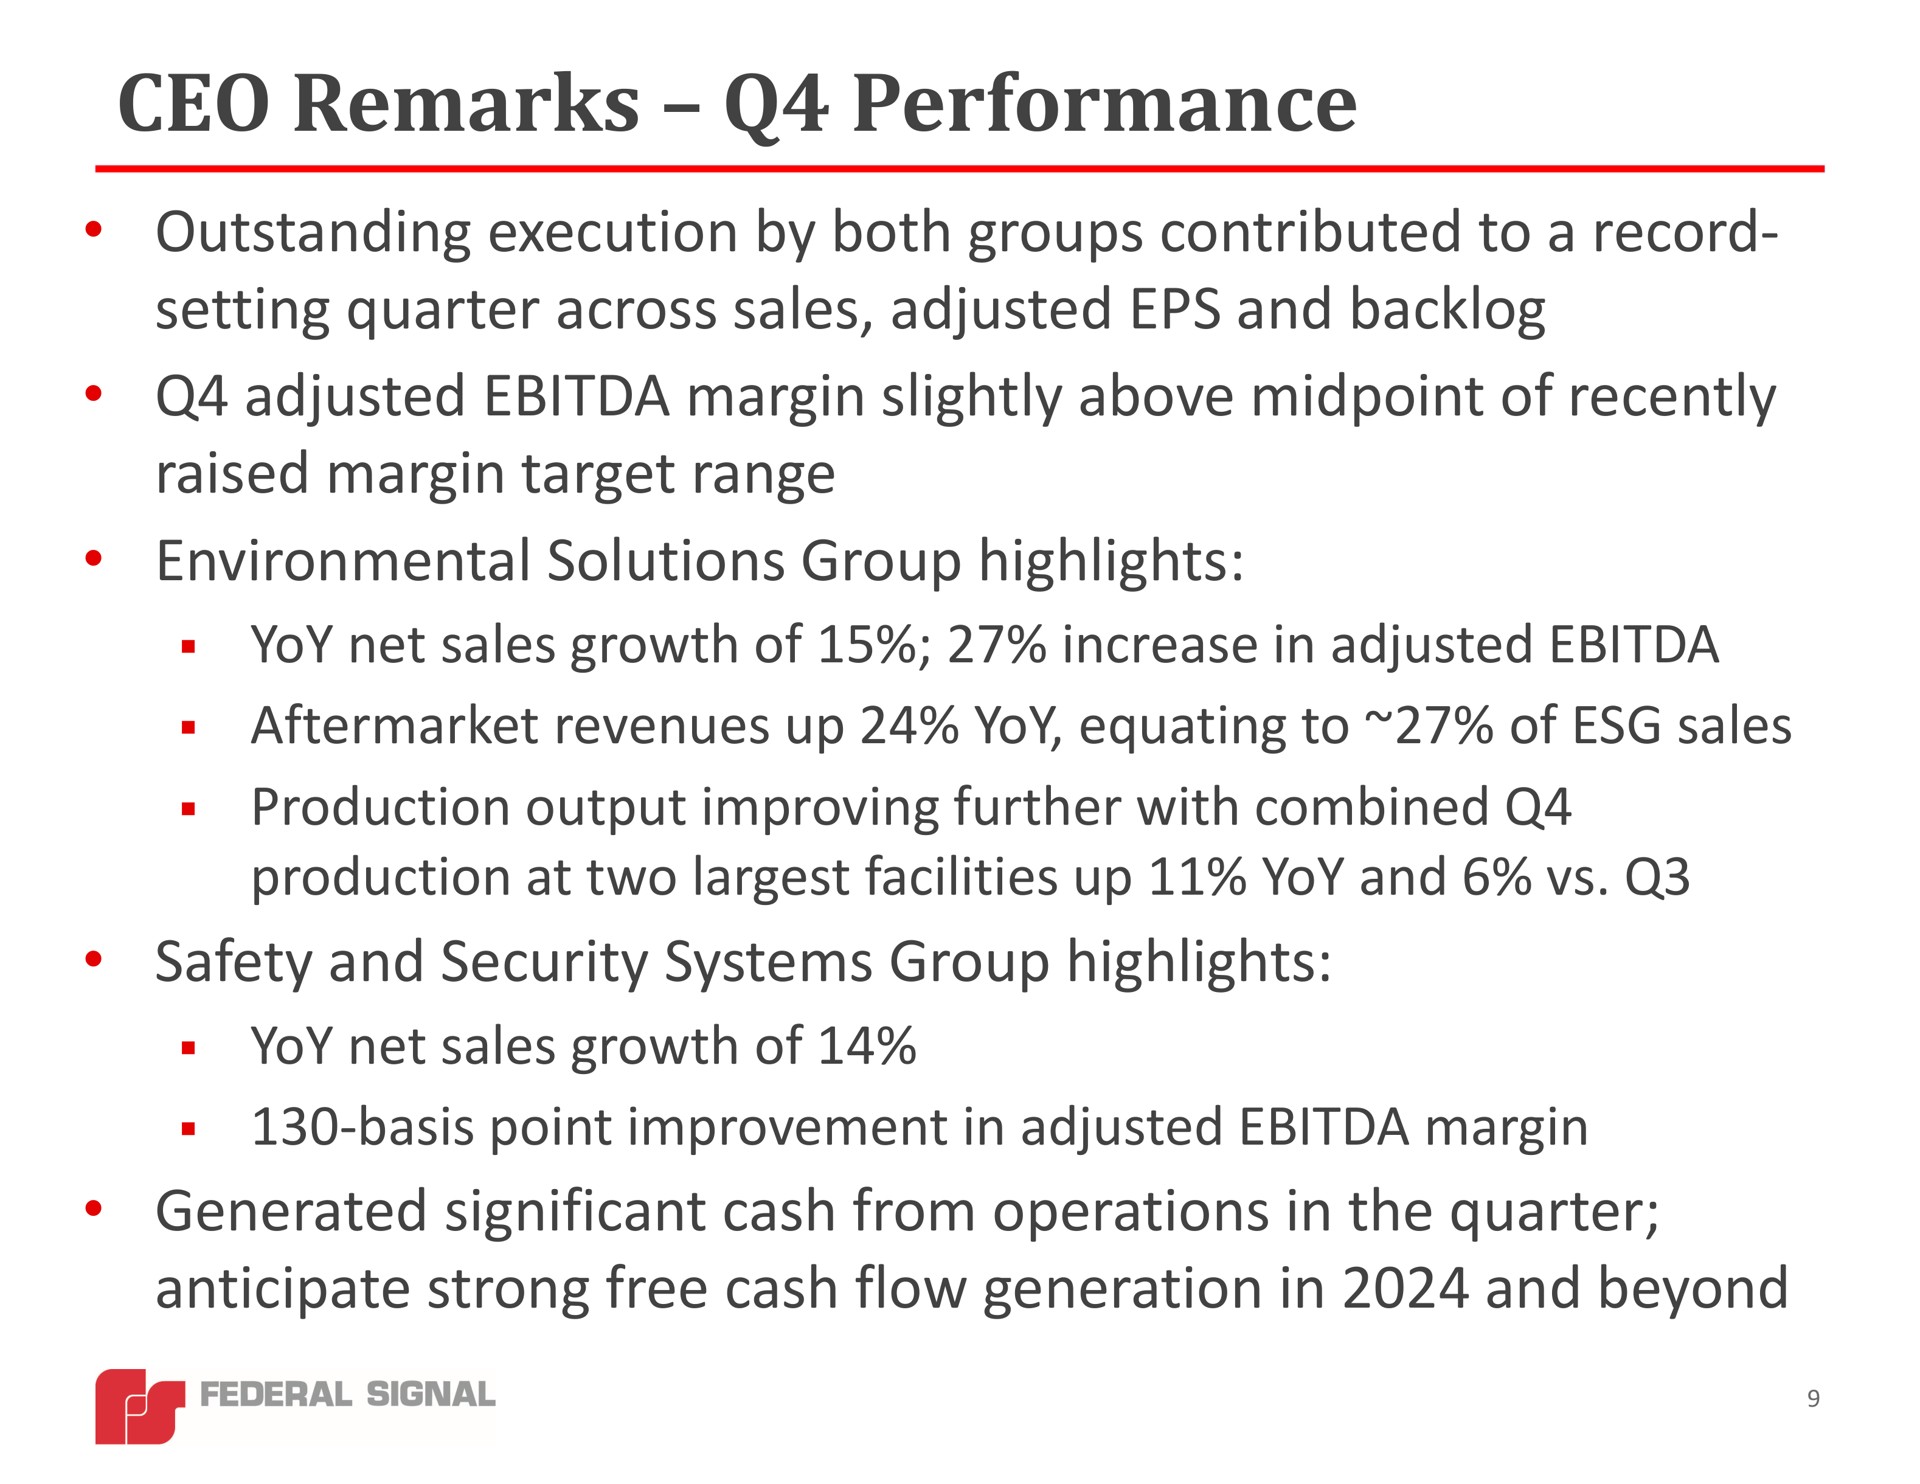 remarks performance outstanding execution by both groups contributed to a record setting quarter across sales adjusted and backlog adjusted margin slightly above of recently raised margin target range environmental solutions group highlights yoy net sales growth of increase in adjusted revenues up yoy equating to of sales production output improving further with combined production at two facilities up yoy and safety and security systems group highlights yoy net sales growth of basis point improvement in adjusted margin generated significant cash from operations in the quarter anticipate strong free cash flow generation in and beyond | Federal Signal